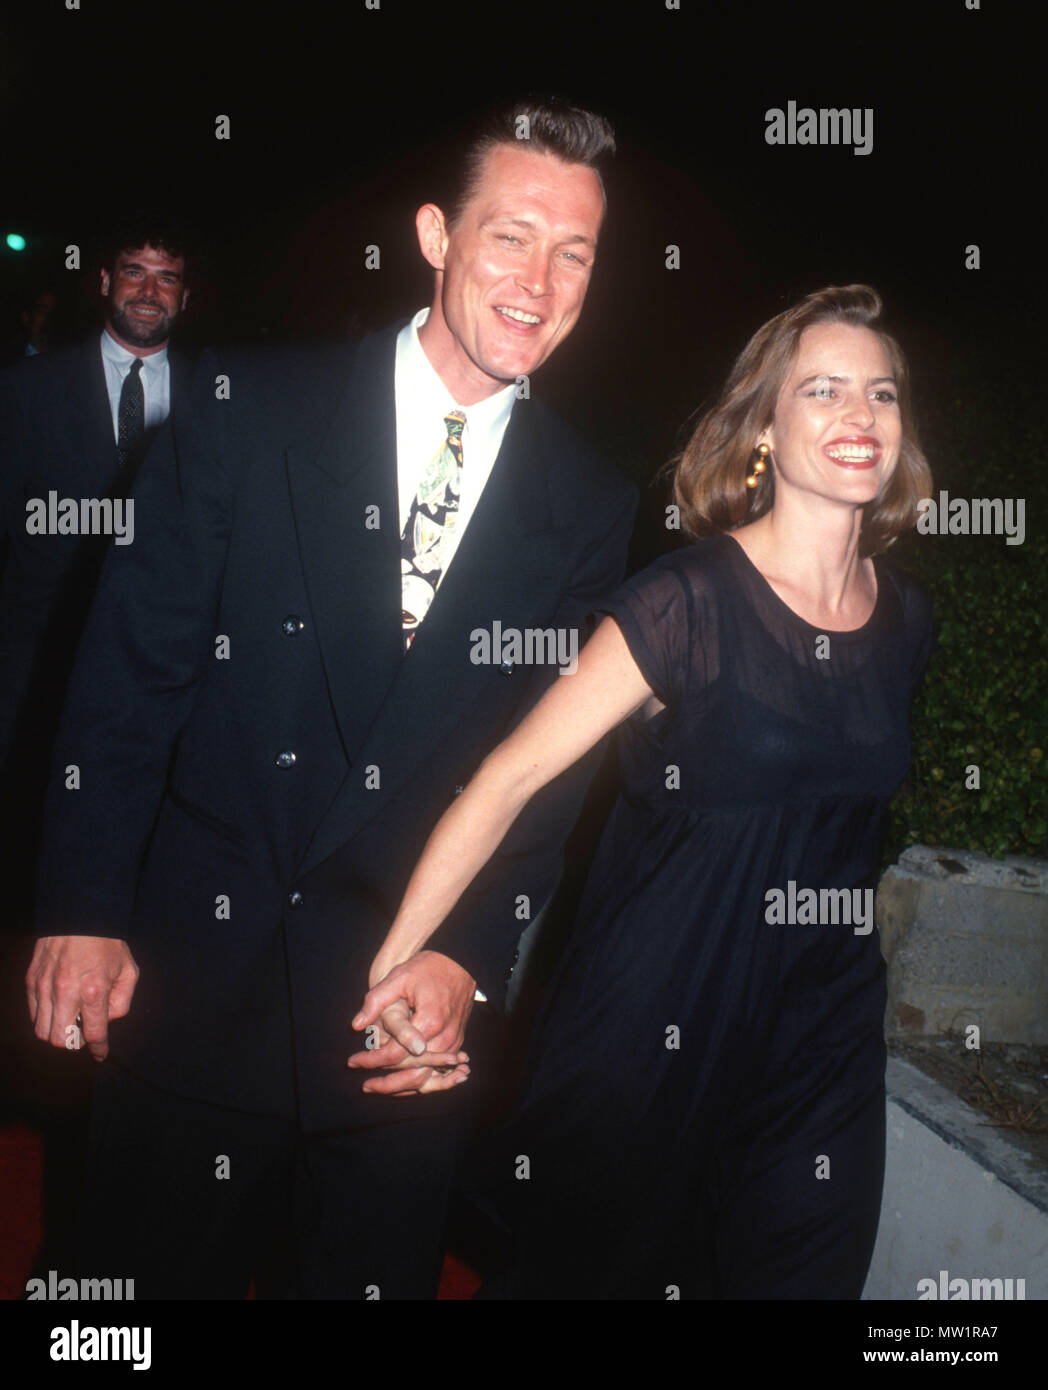 LOS ANGELES, CA - JULY 1: (L-R) Actor Robert Patrick and wife Barbara Patrick attend the 'Terminator 2: Judgement Day' Los Angeles Premiere on July 1, 1991 at Cineplex Odeon Cinemas in Los Angeles, California. Photo by Barry King/Alamy Stock Photo Stock Photo